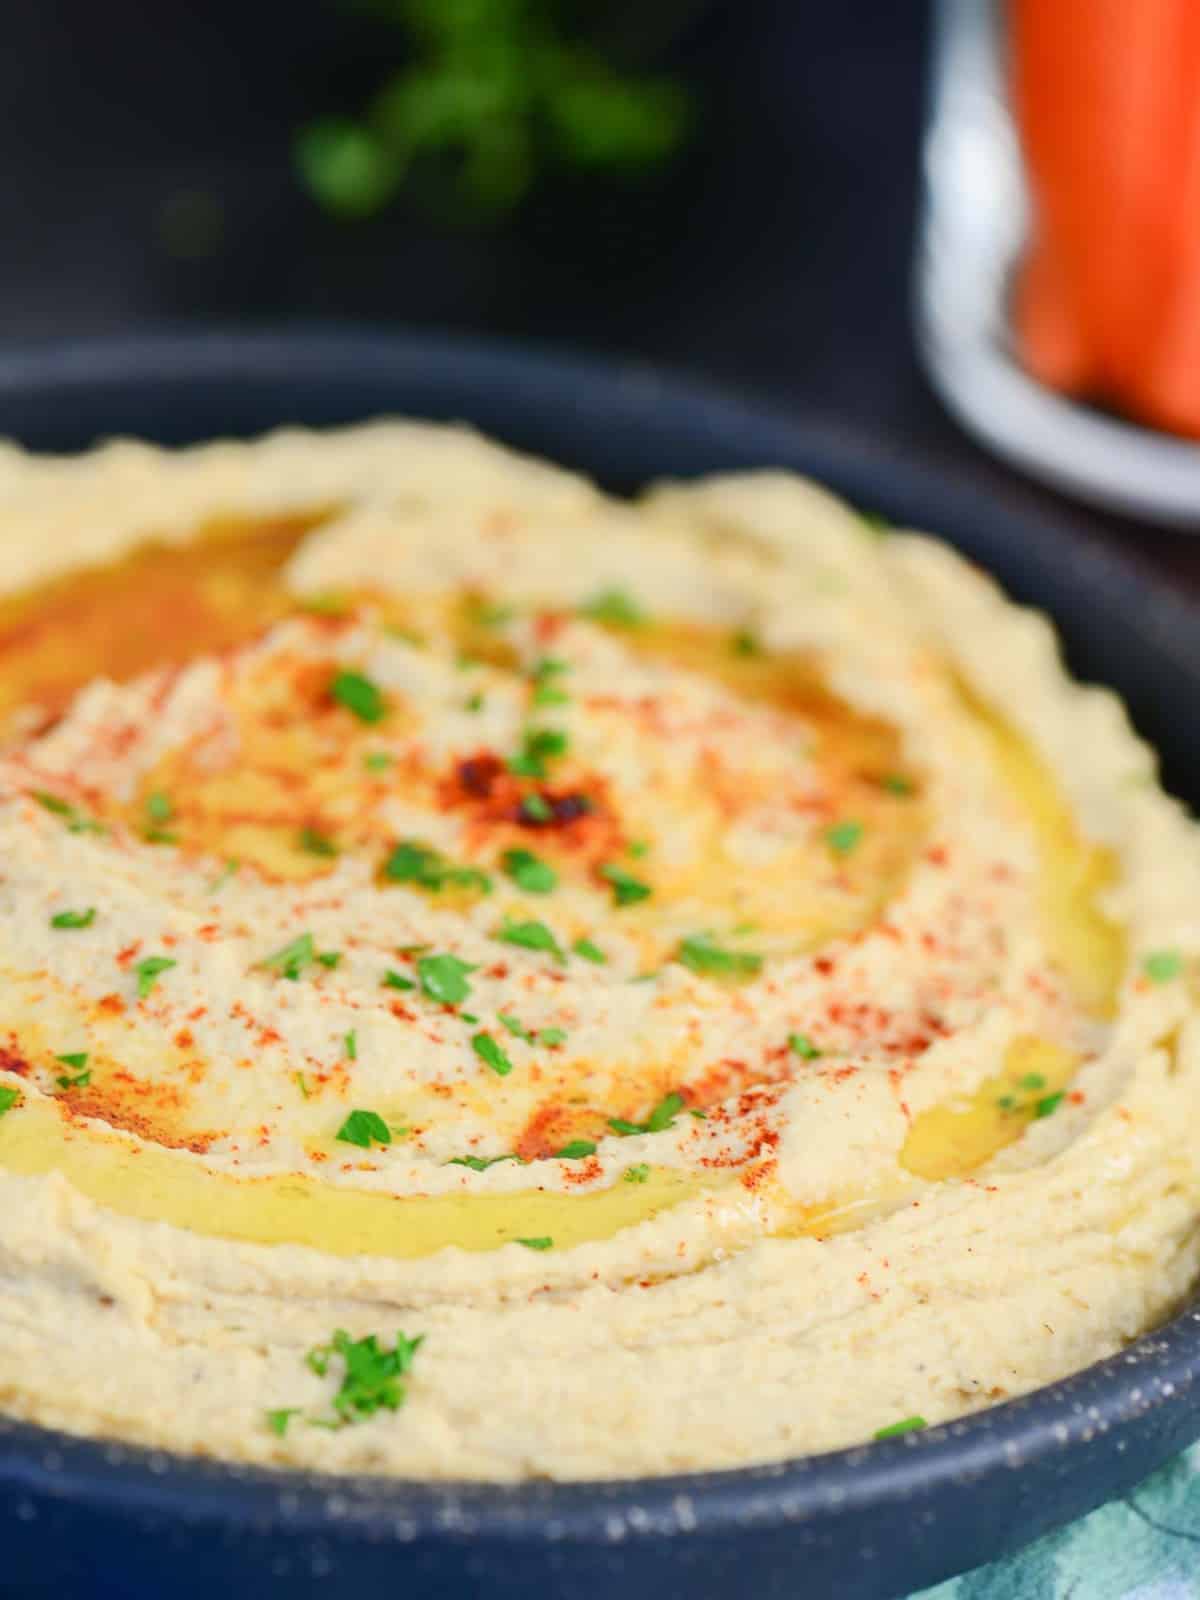 homemade hummus with olive oil drizzled on top and a sprinkle of paprika